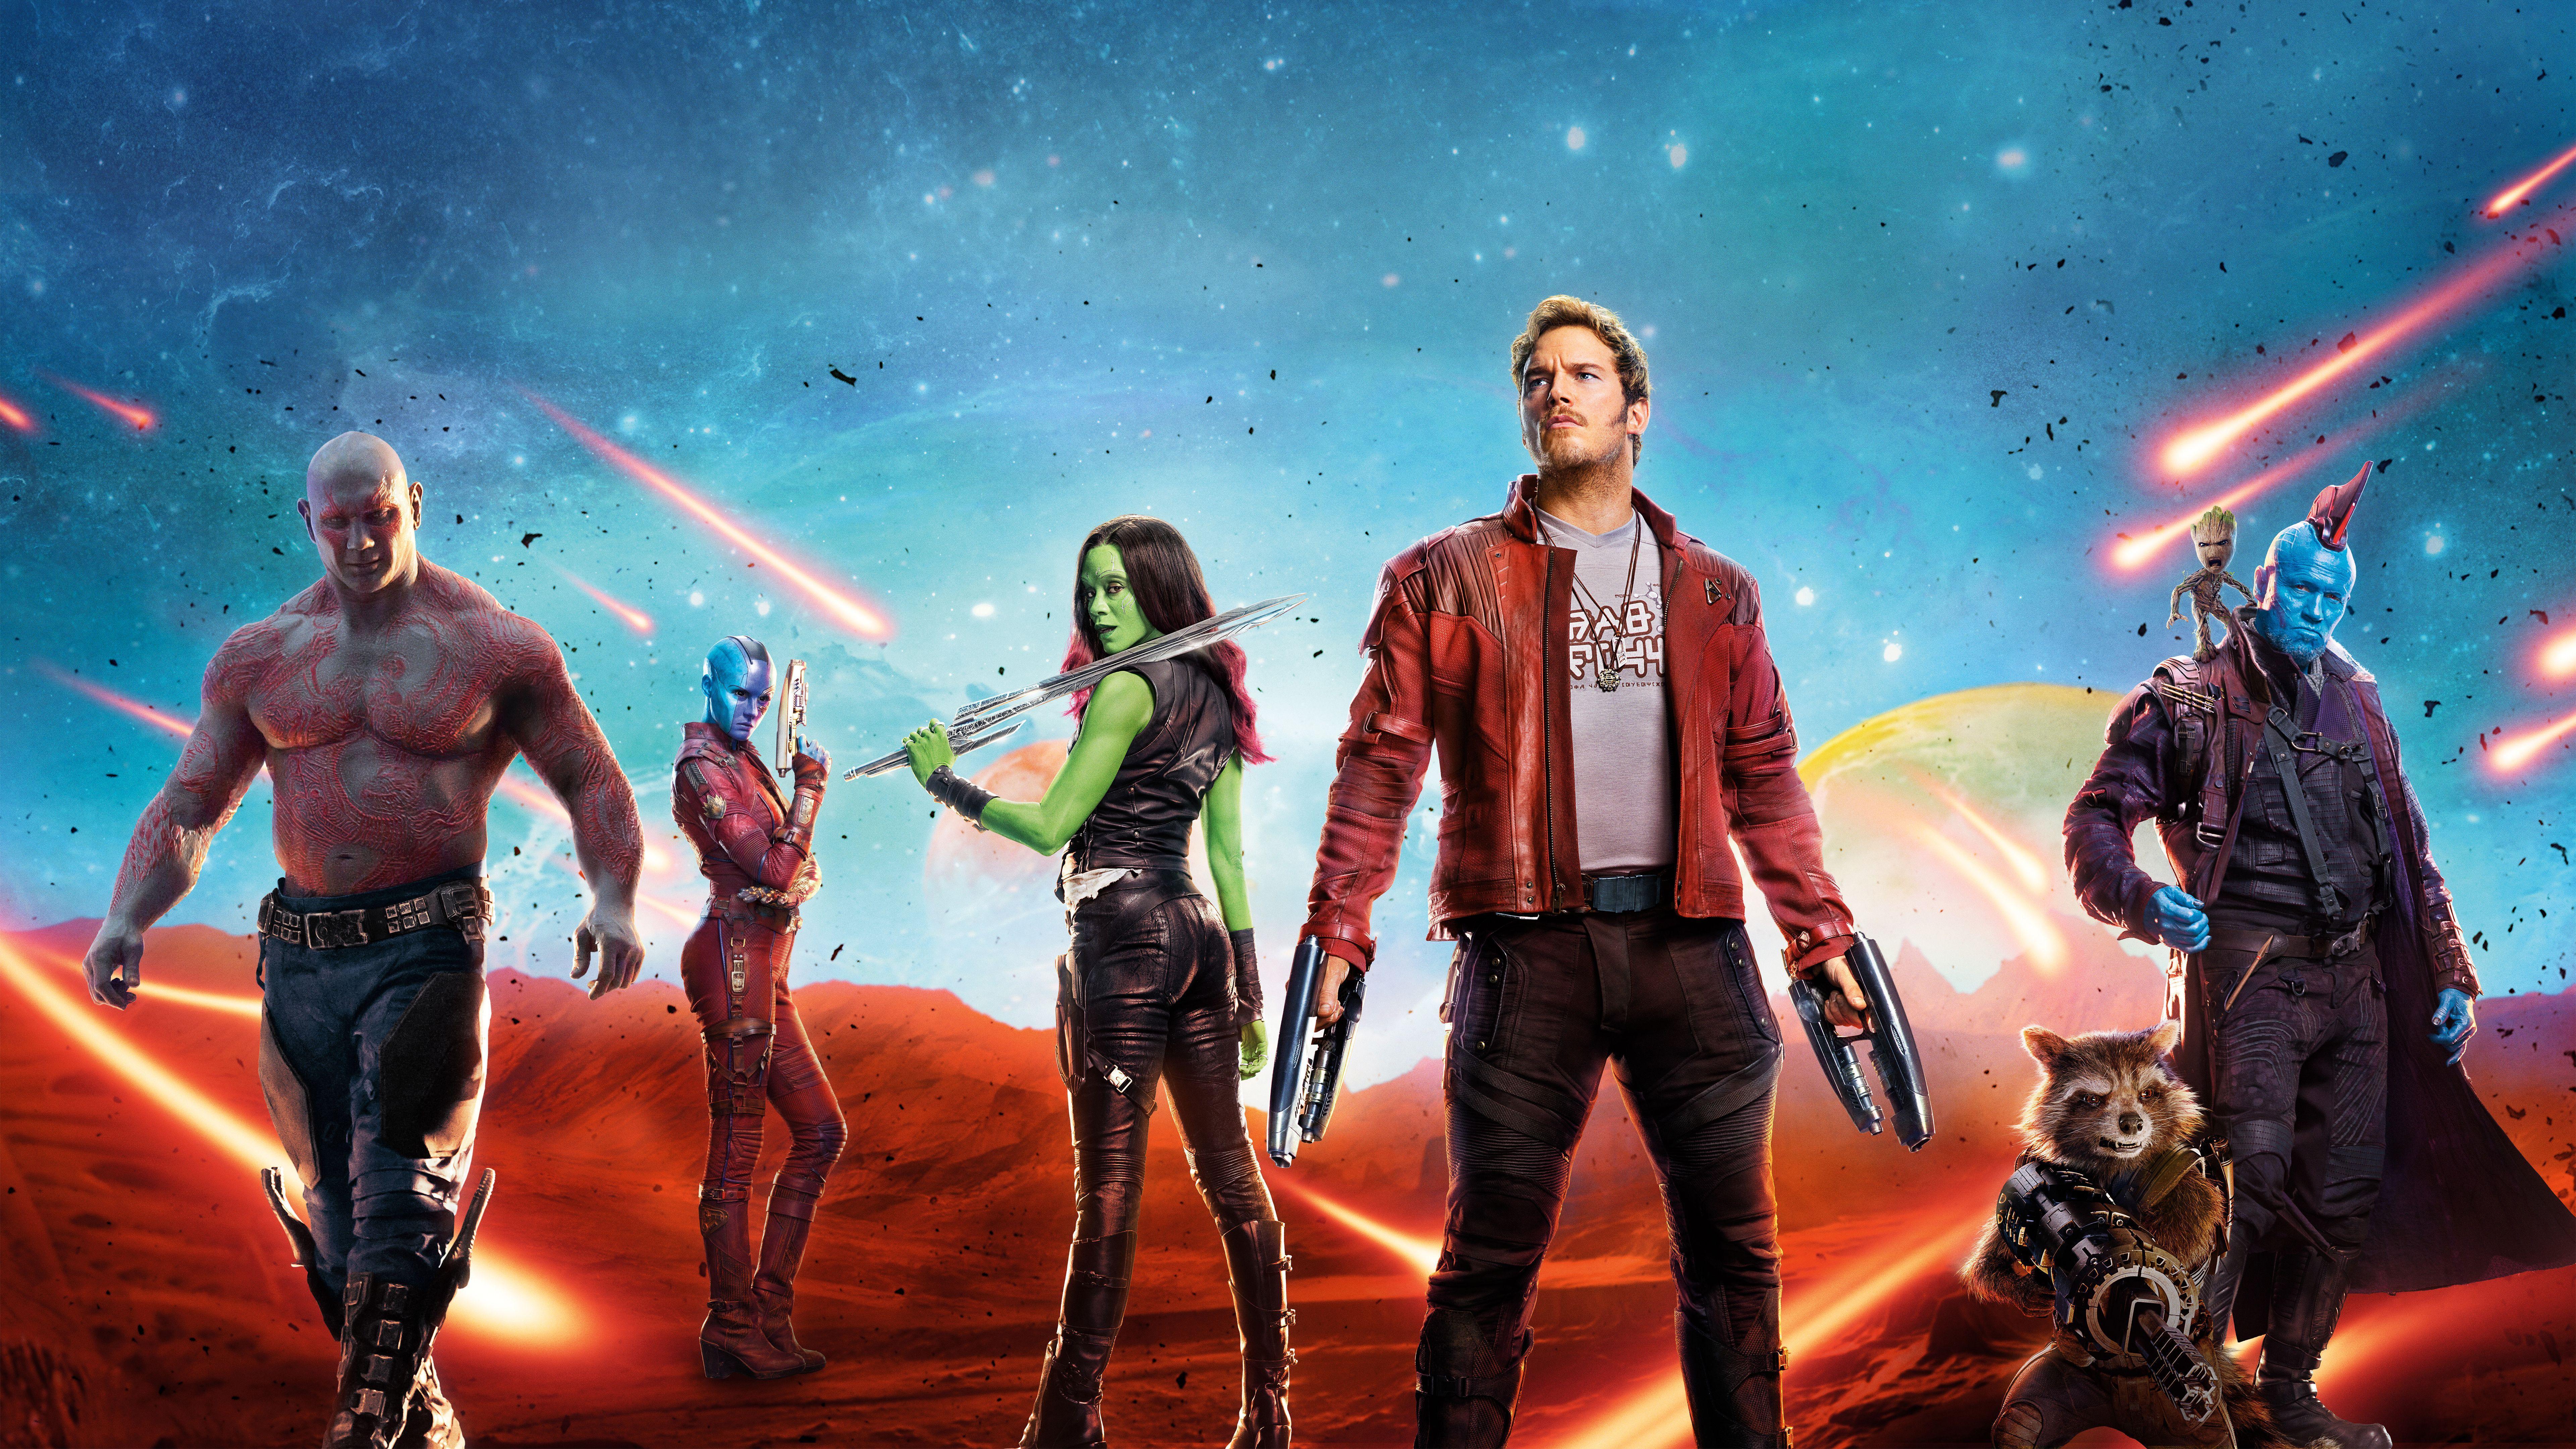 84 Guardians Of The Galaxy Vol. 2 HD Wallpapers